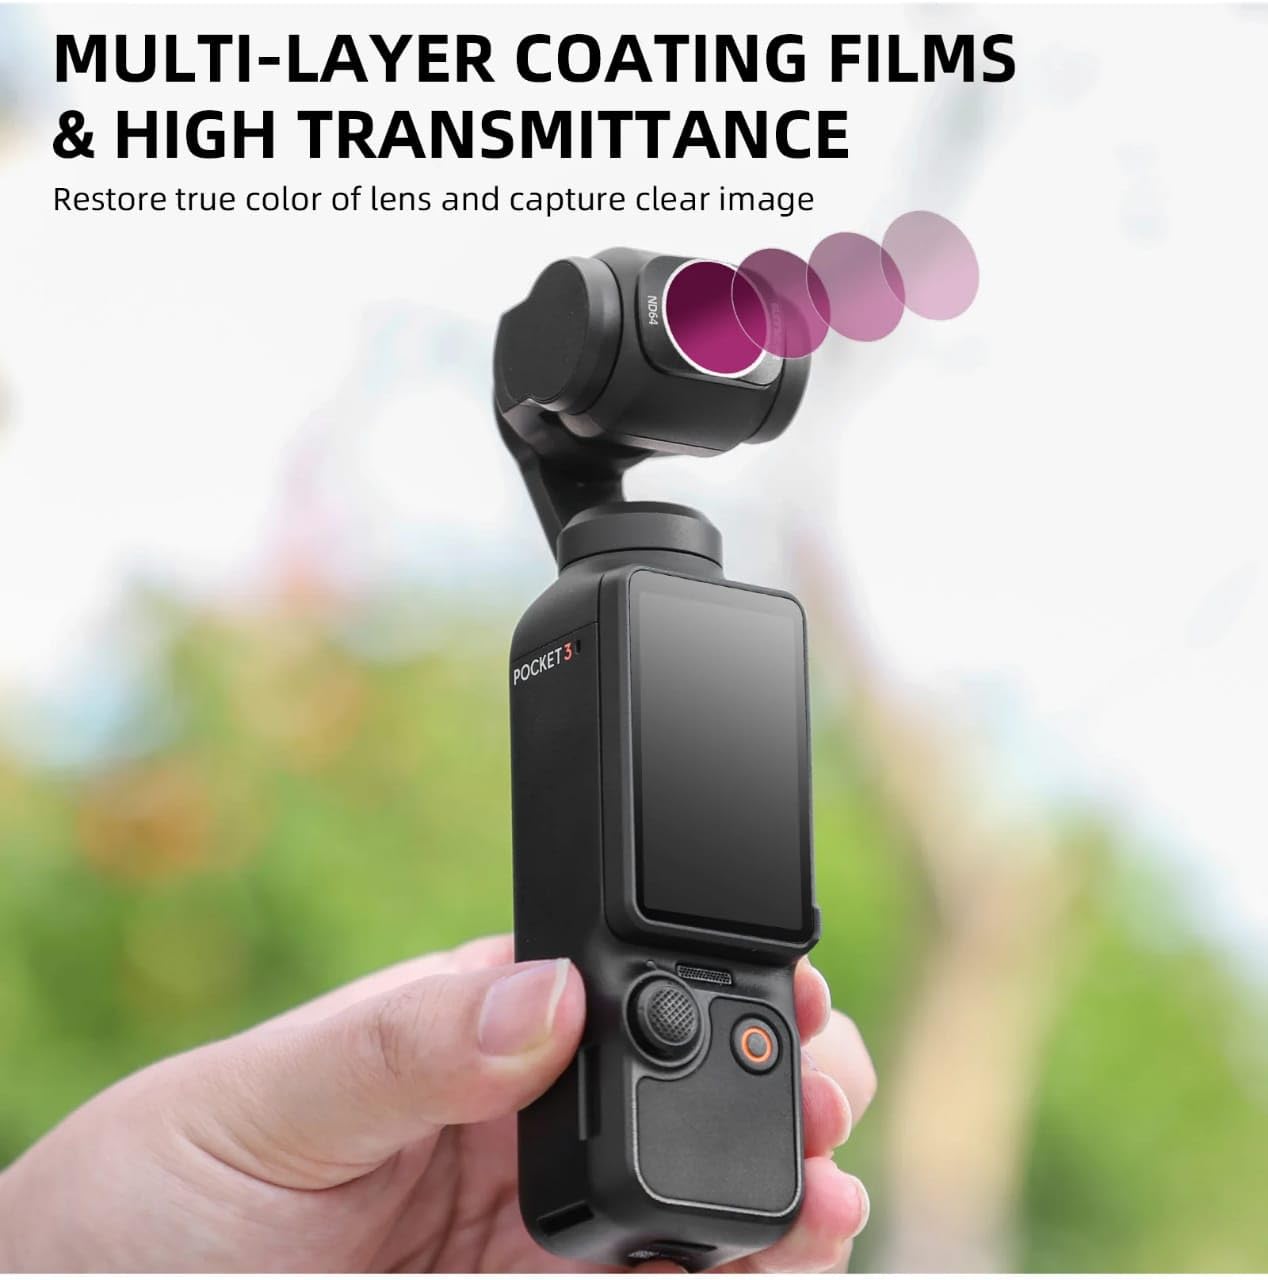 Nd Filters for DJI Osmo Pocket 3 Camera